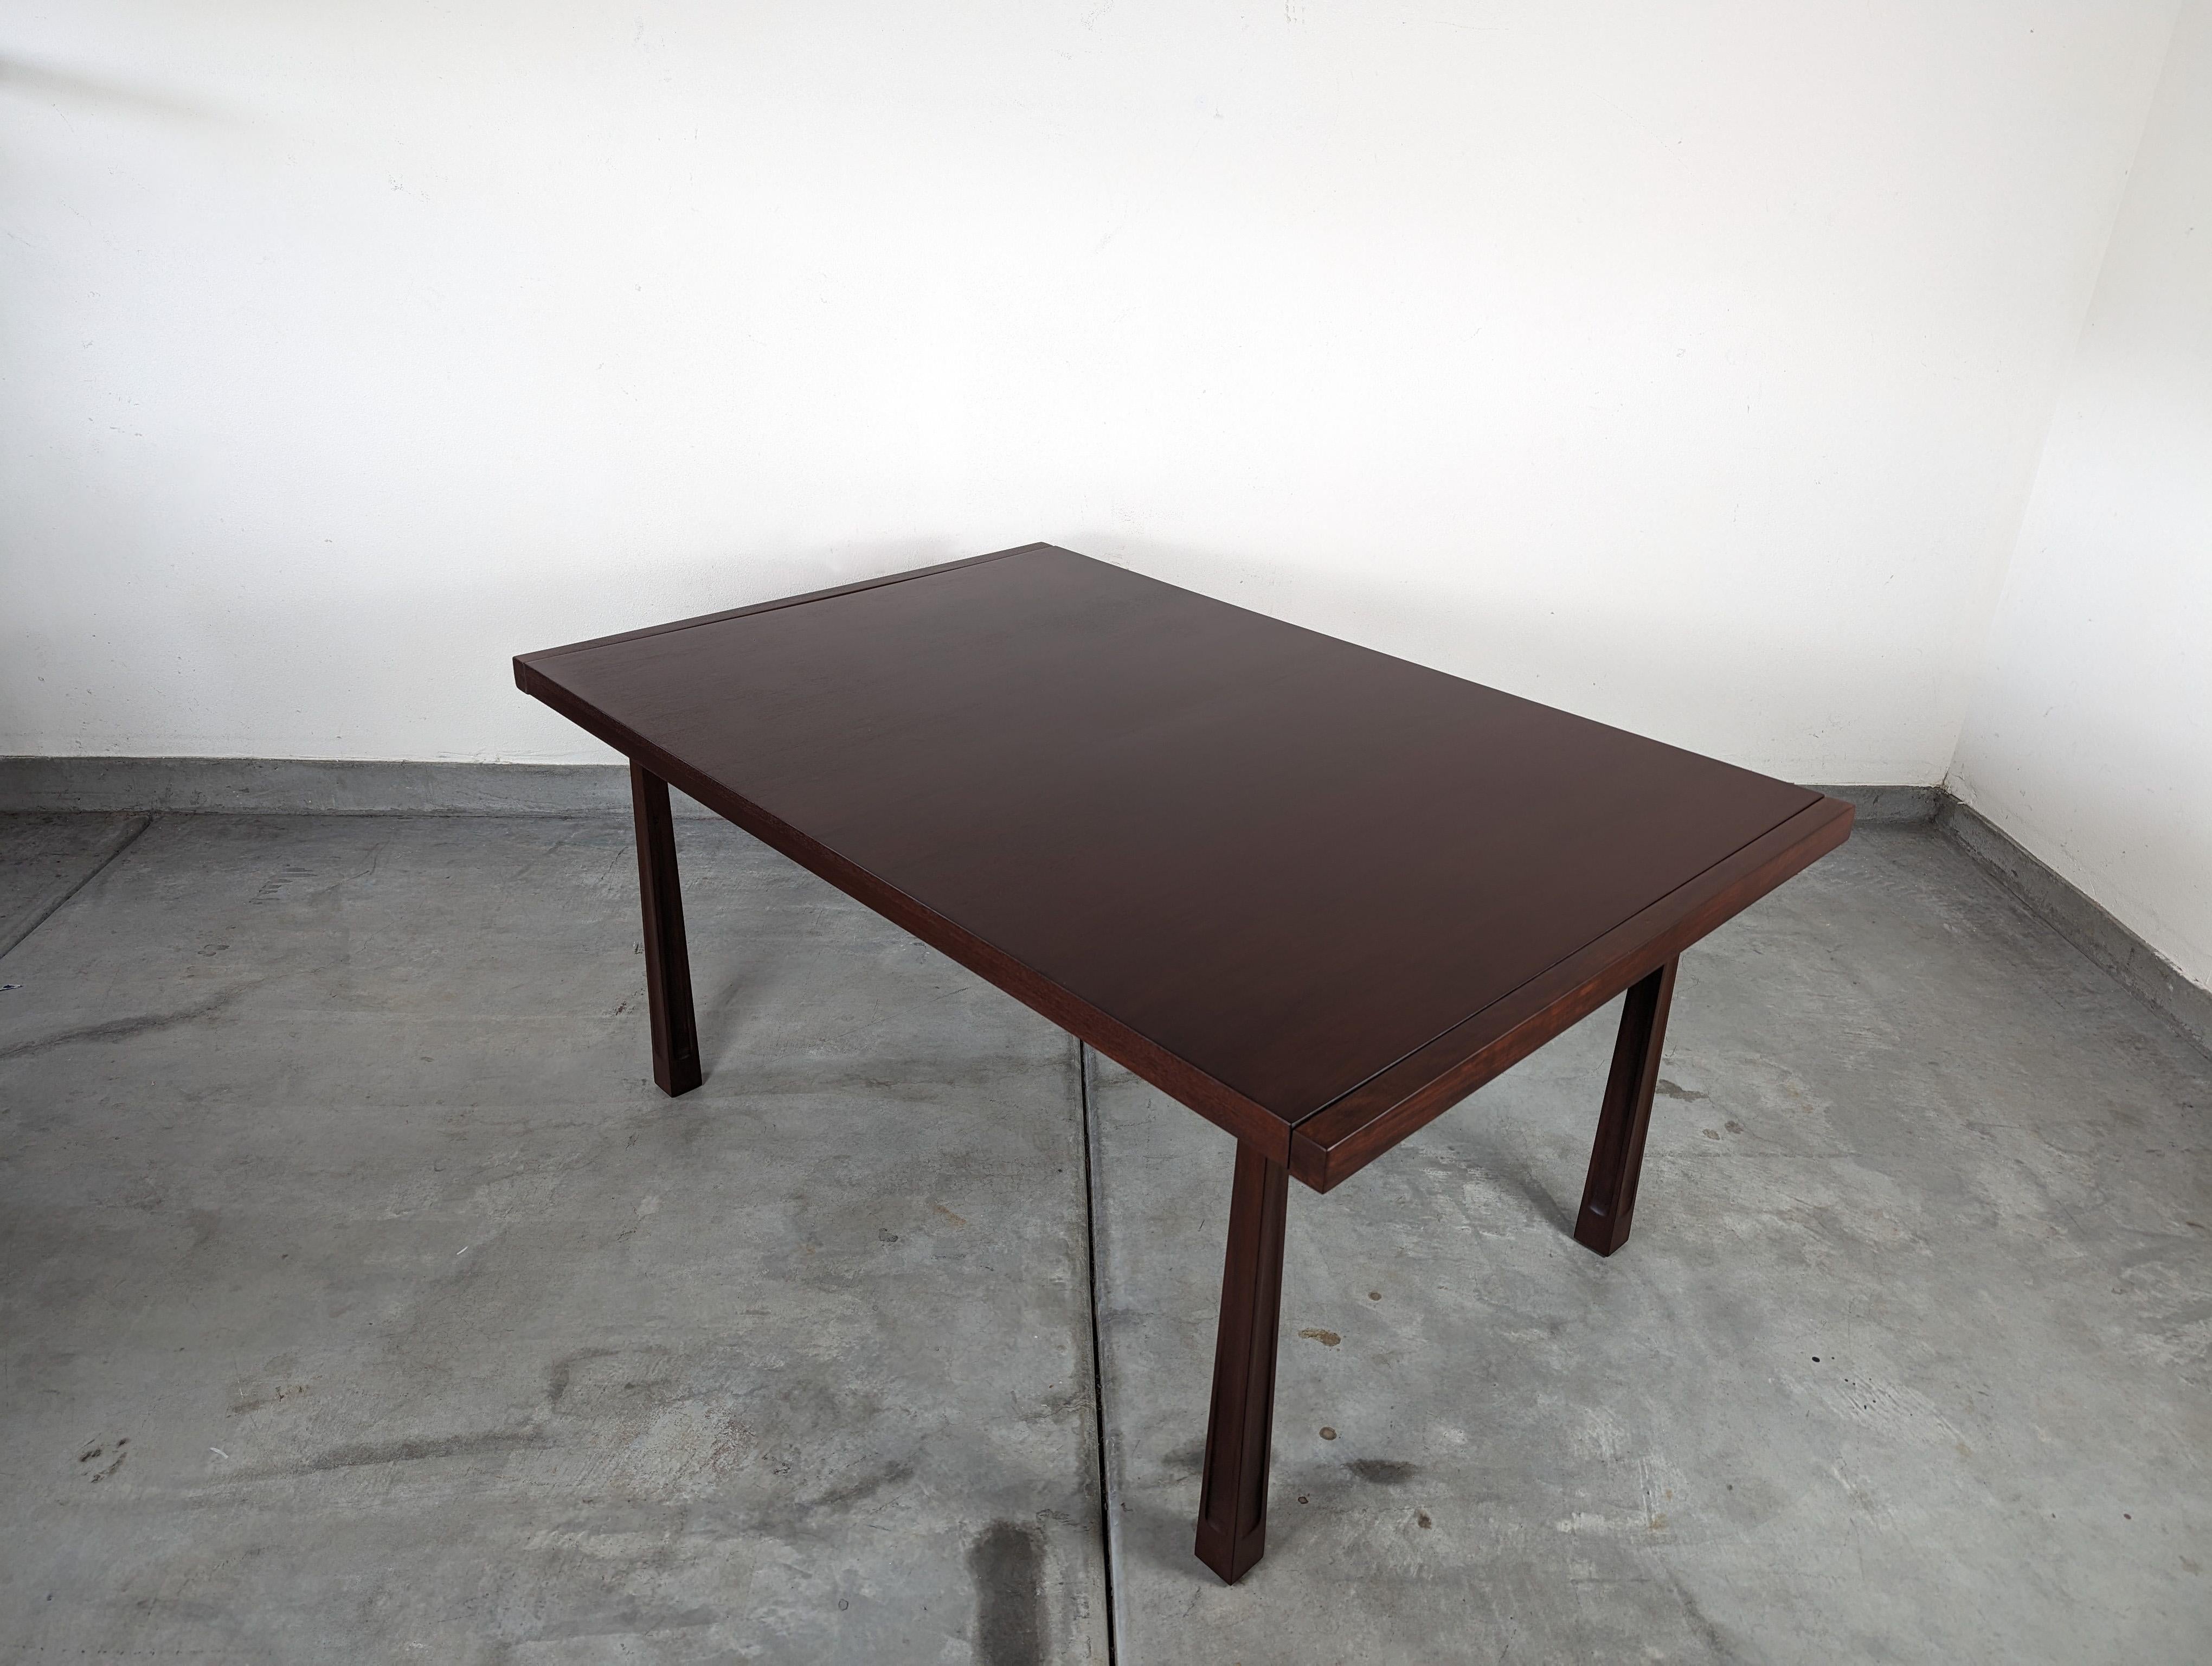 Mid-20th Century Mid-Century Dining Table by Edmond J. Spence for Industria Mueblera of Mexico